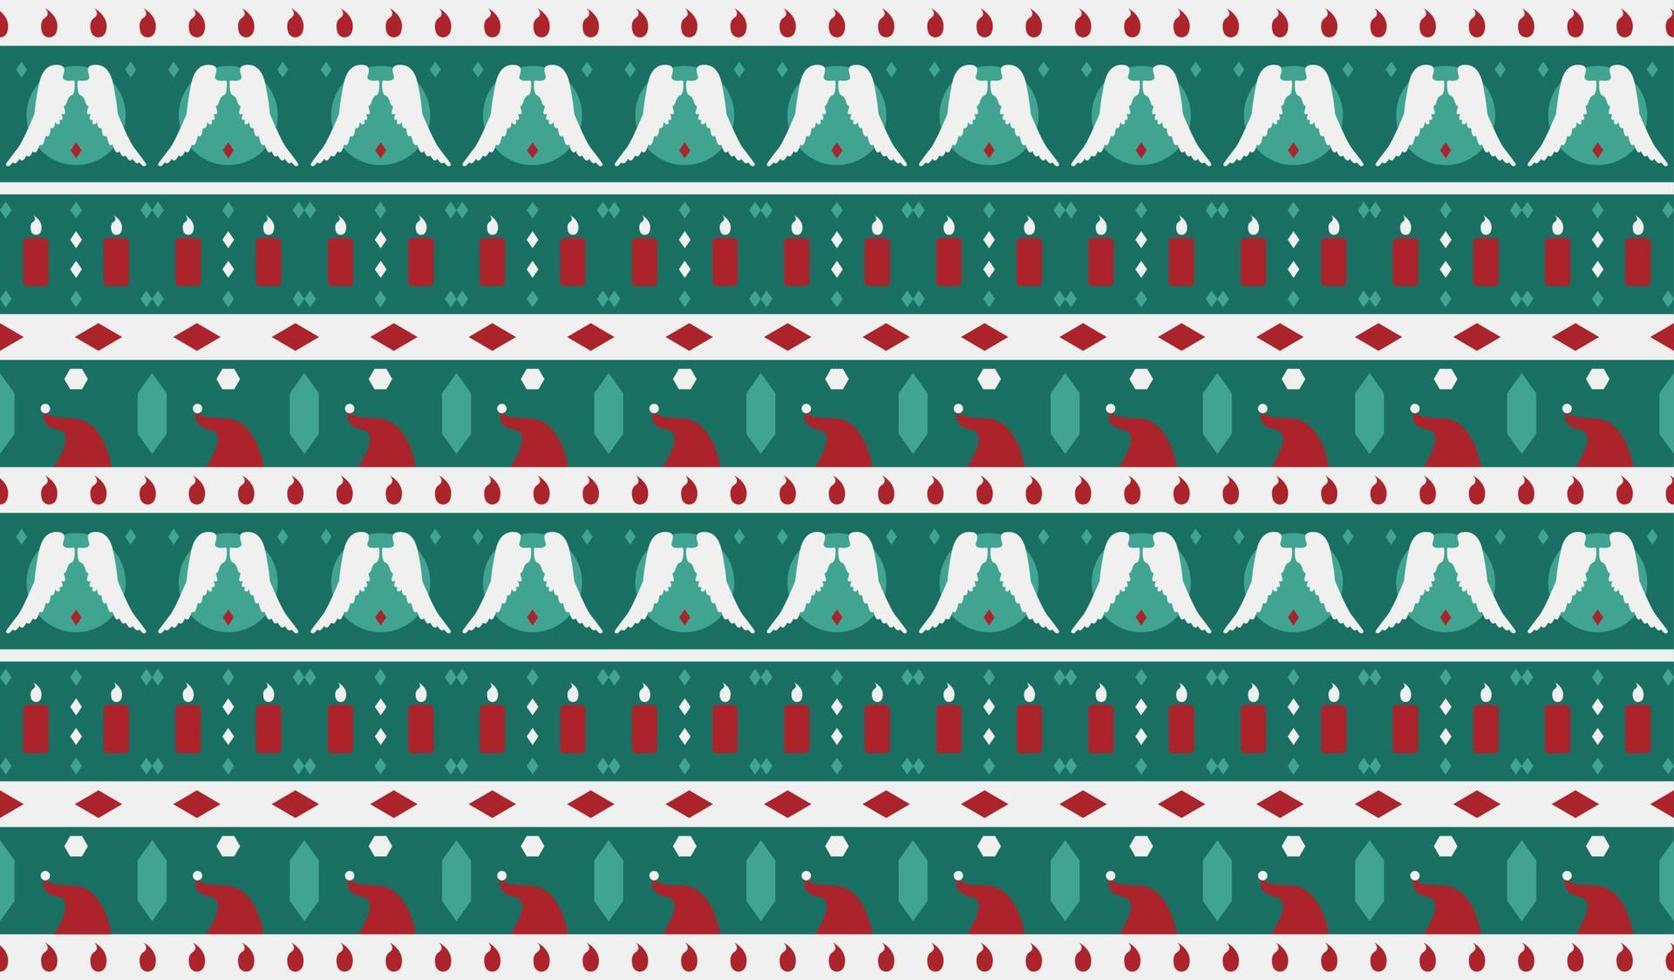 wallpaper background pattern template icon party cartoon poster flyer vector palette indian tribal fashion season vintage aztec christmas folk gift december merry santa angel snowflake candle light